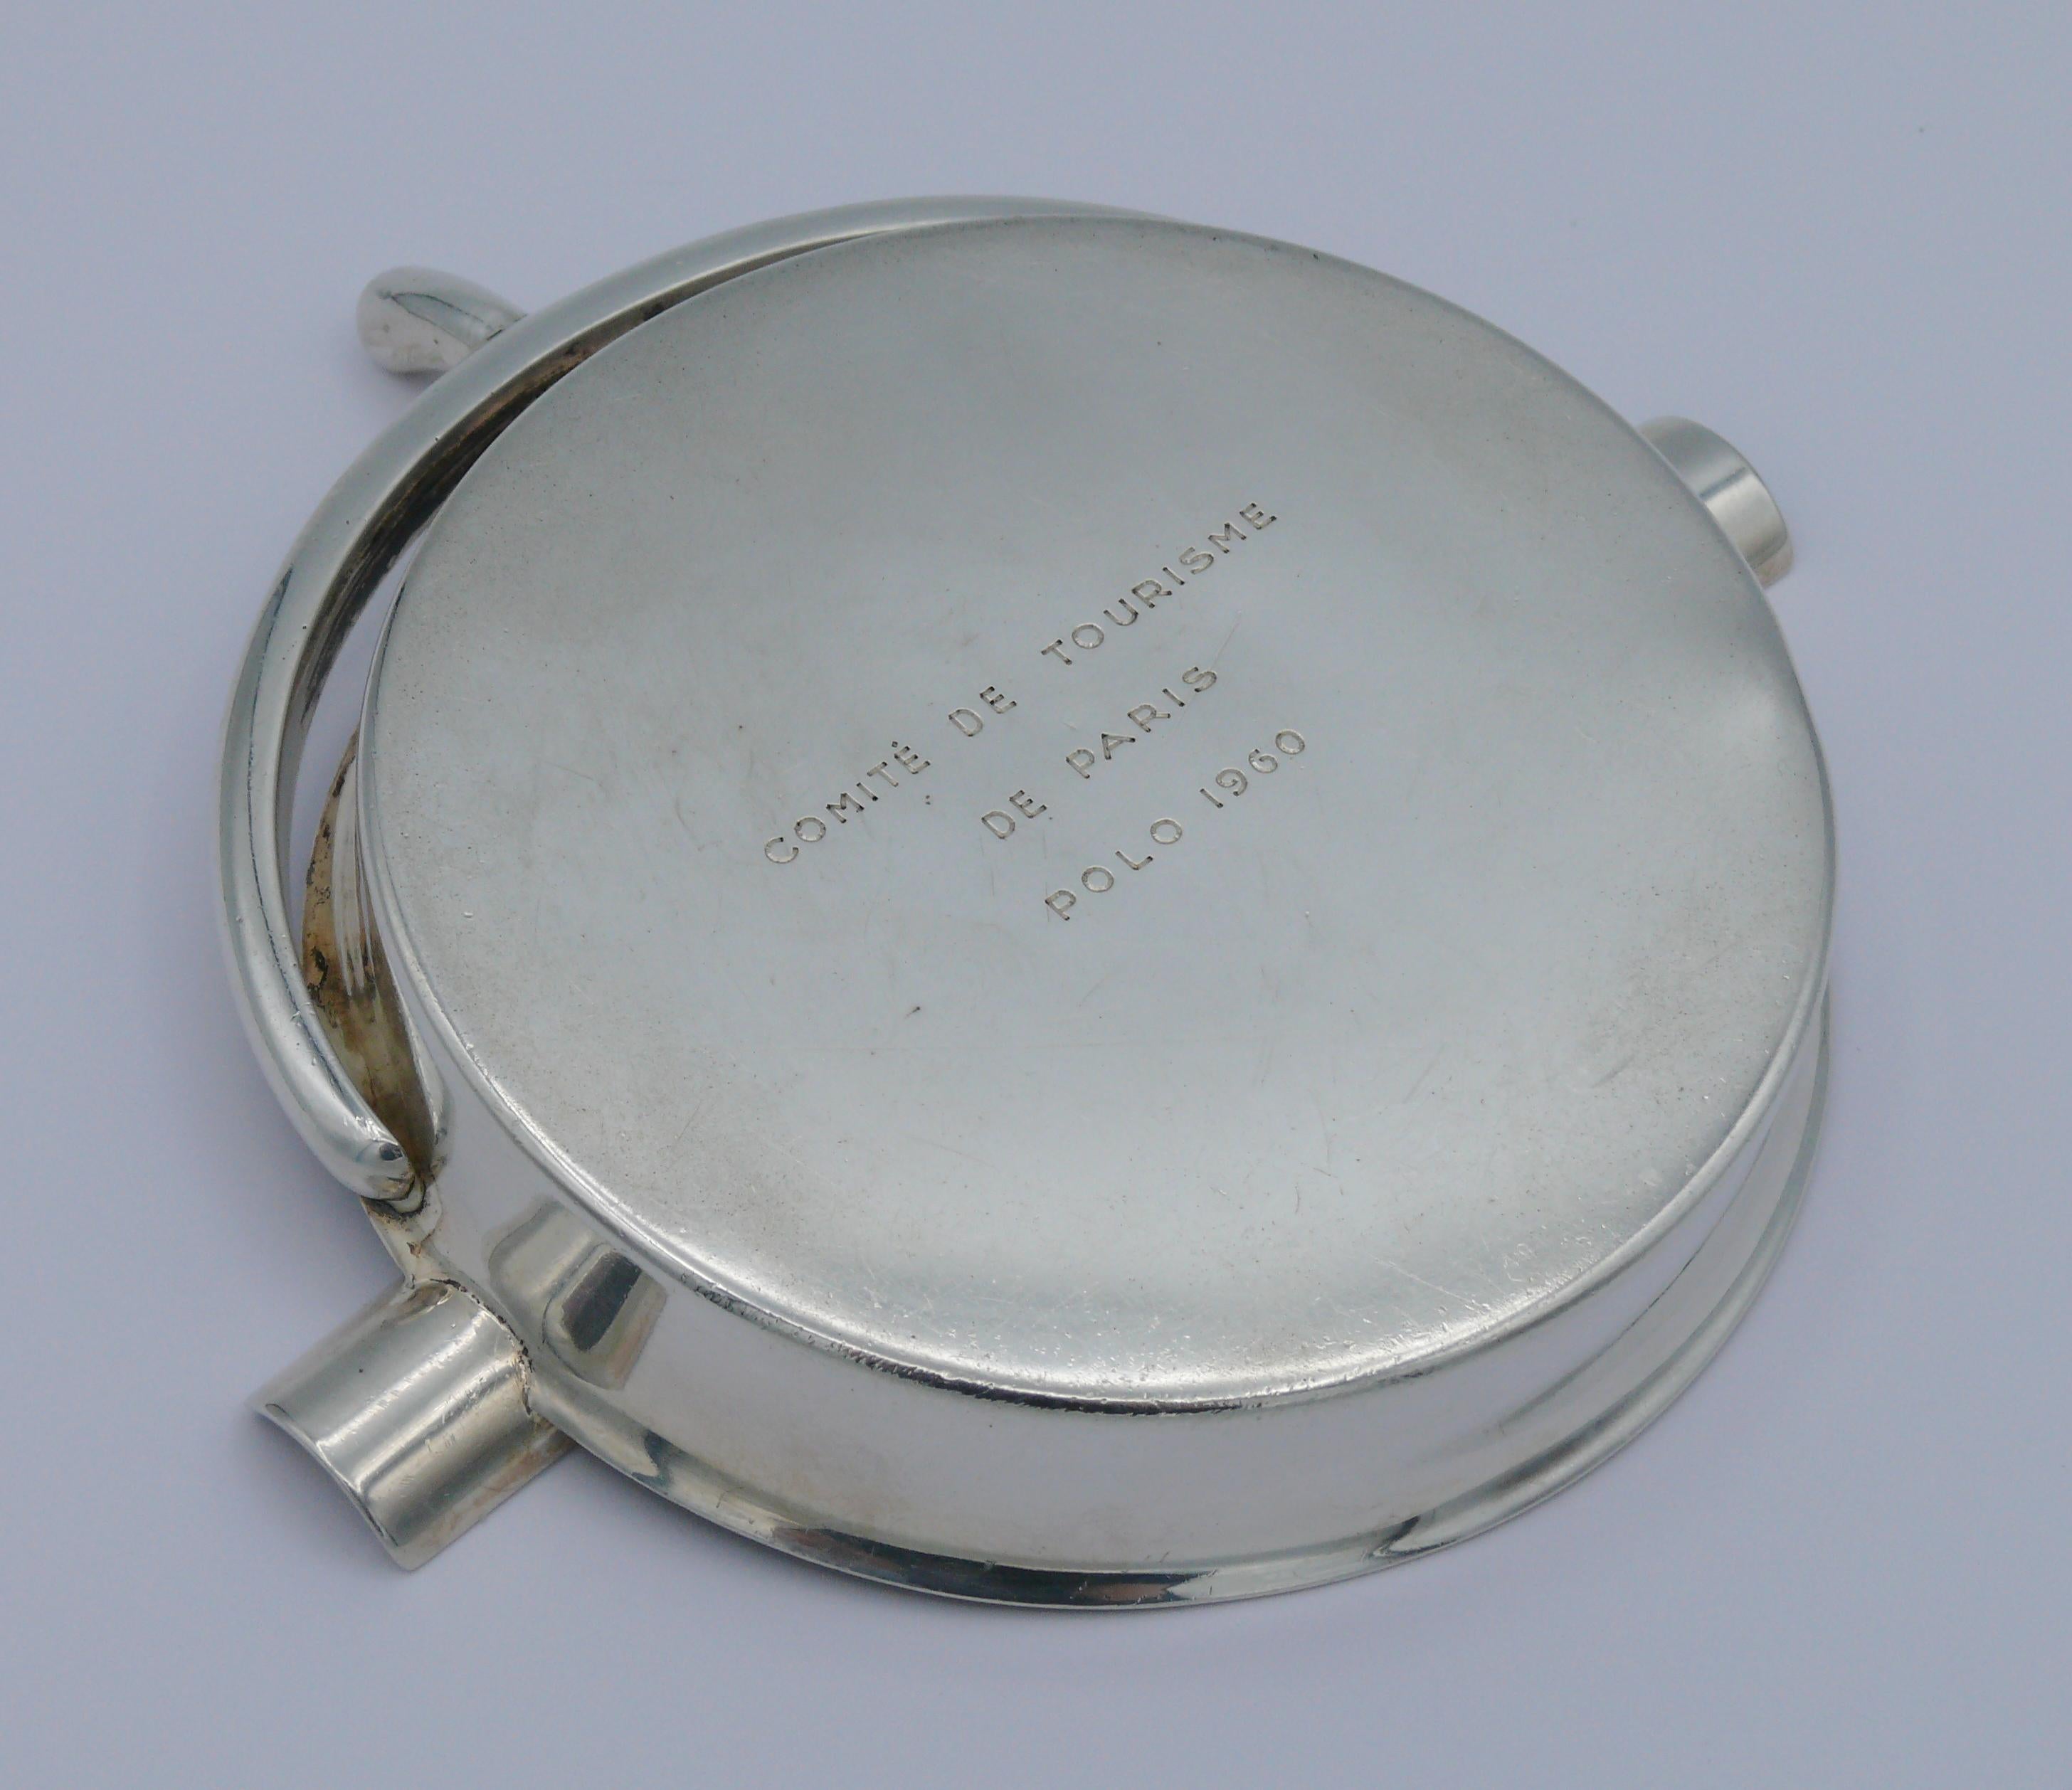 HERMES Vintage Solid Silver Guilloche Stirrup Ashtray For Sale 3